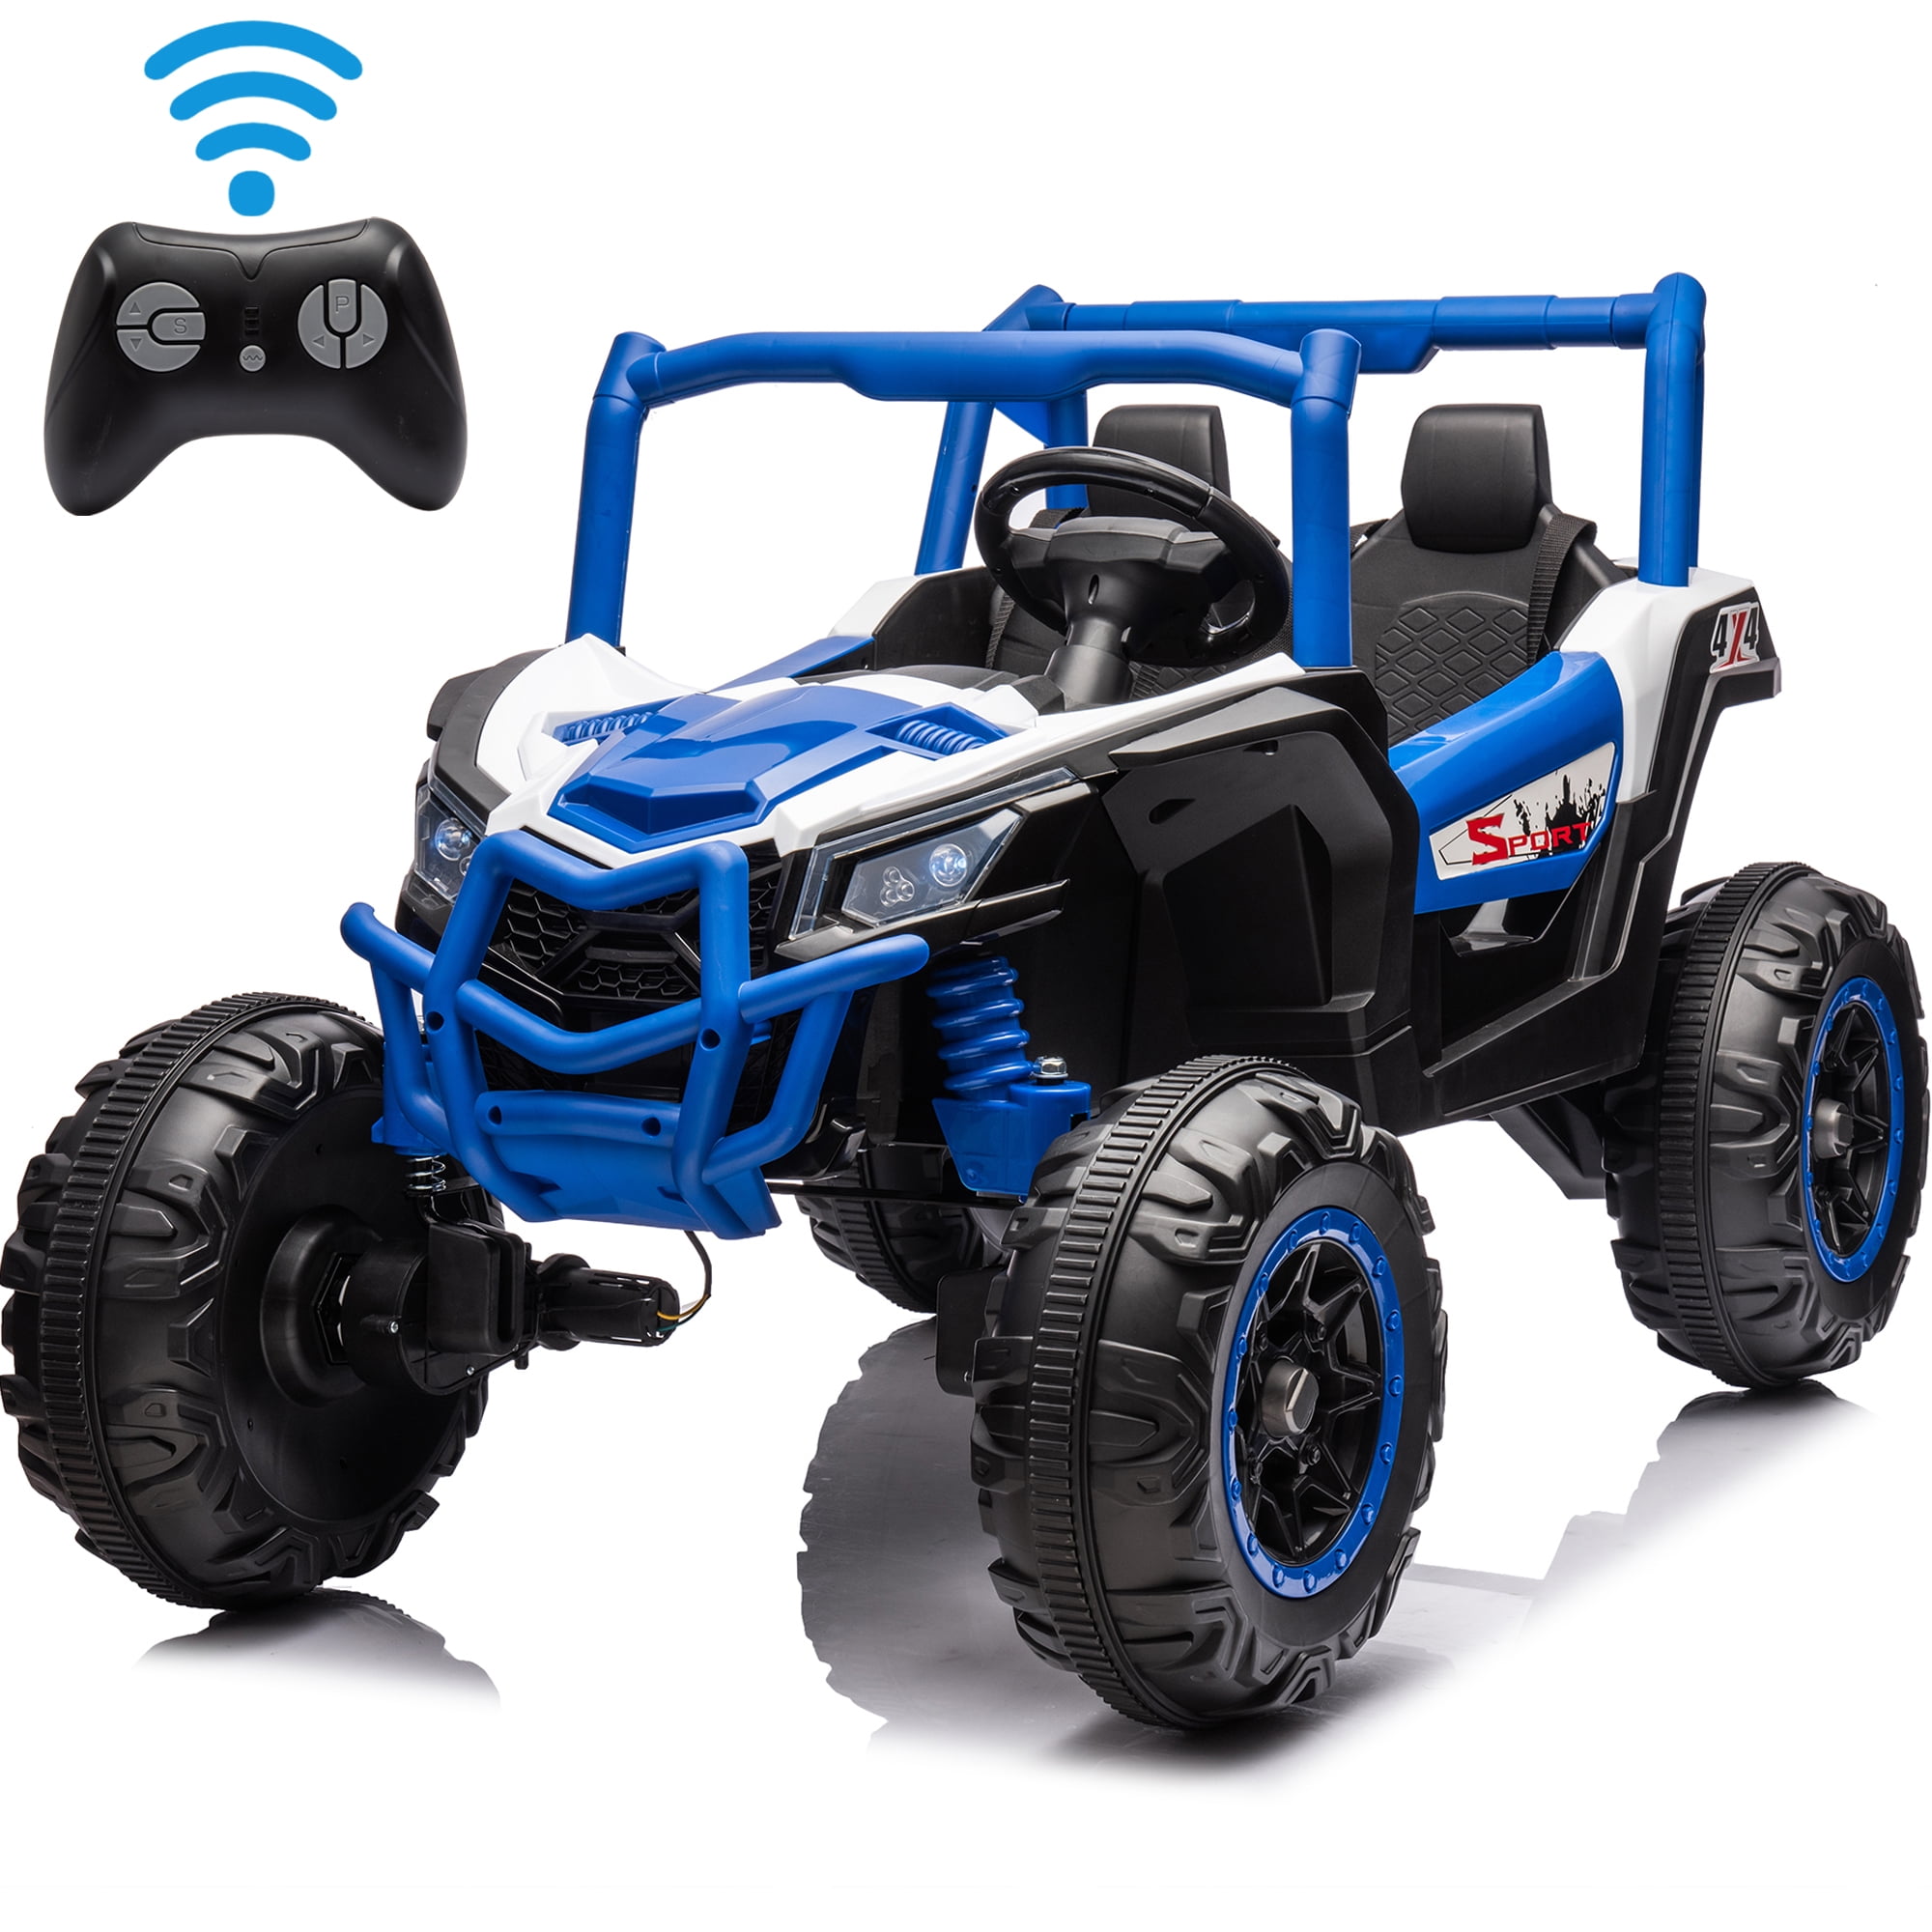 VILOBOS 12V Ride On Tractor with Trailer - Battery Powered Toy Car for